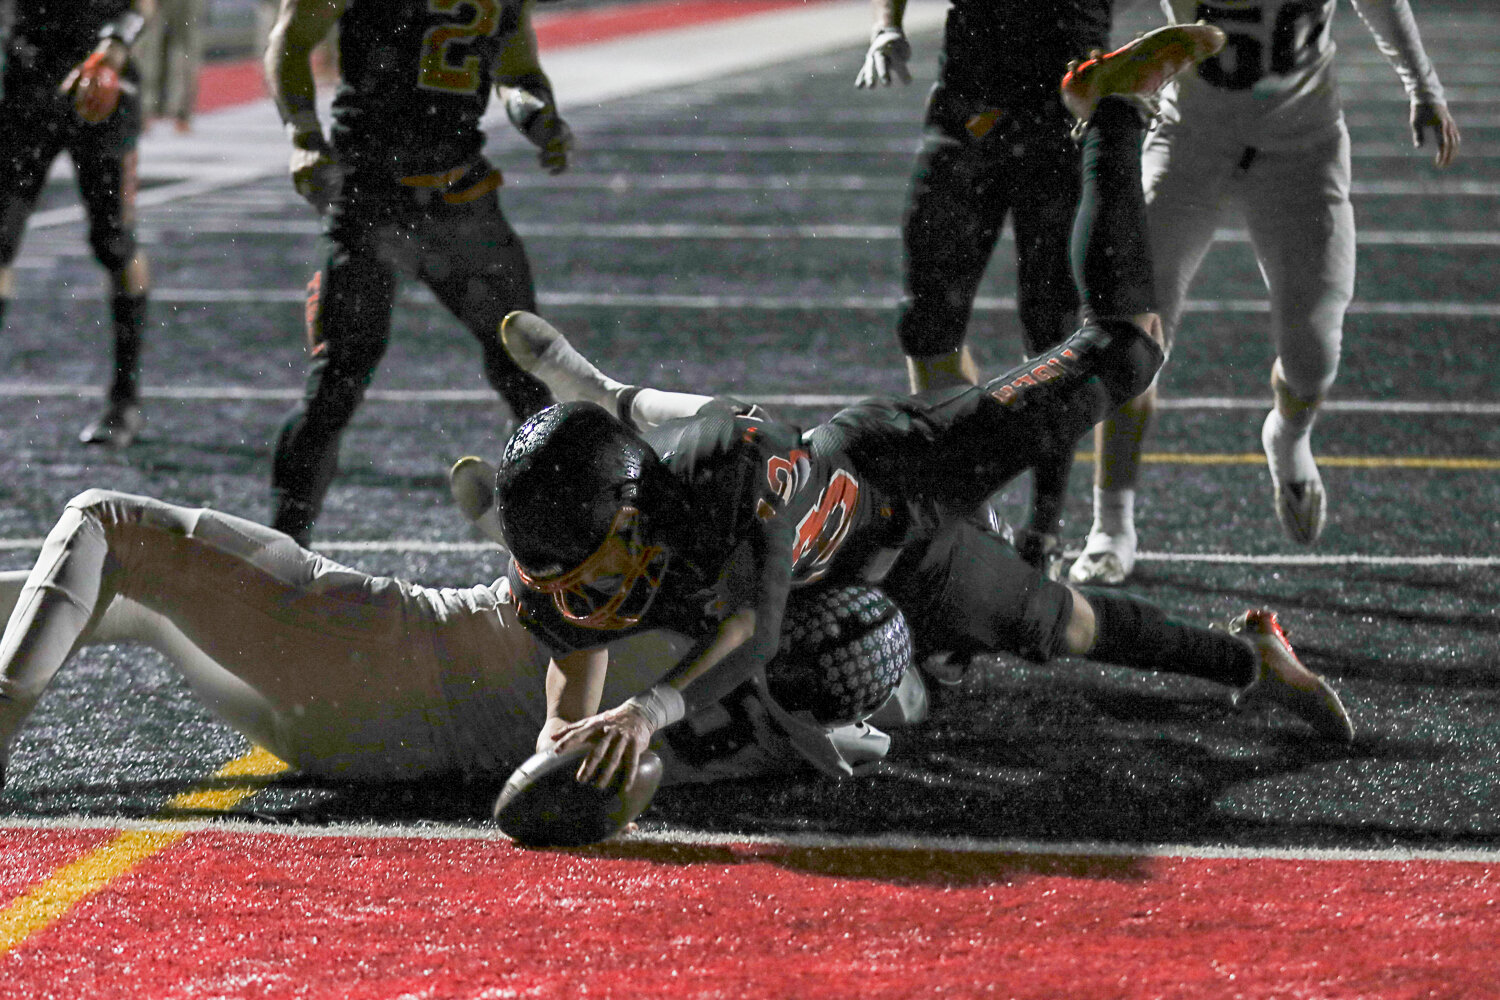 Conner Holmes stretches for the endzone during a 43-14 Napavine win over River View on Nov. 18.